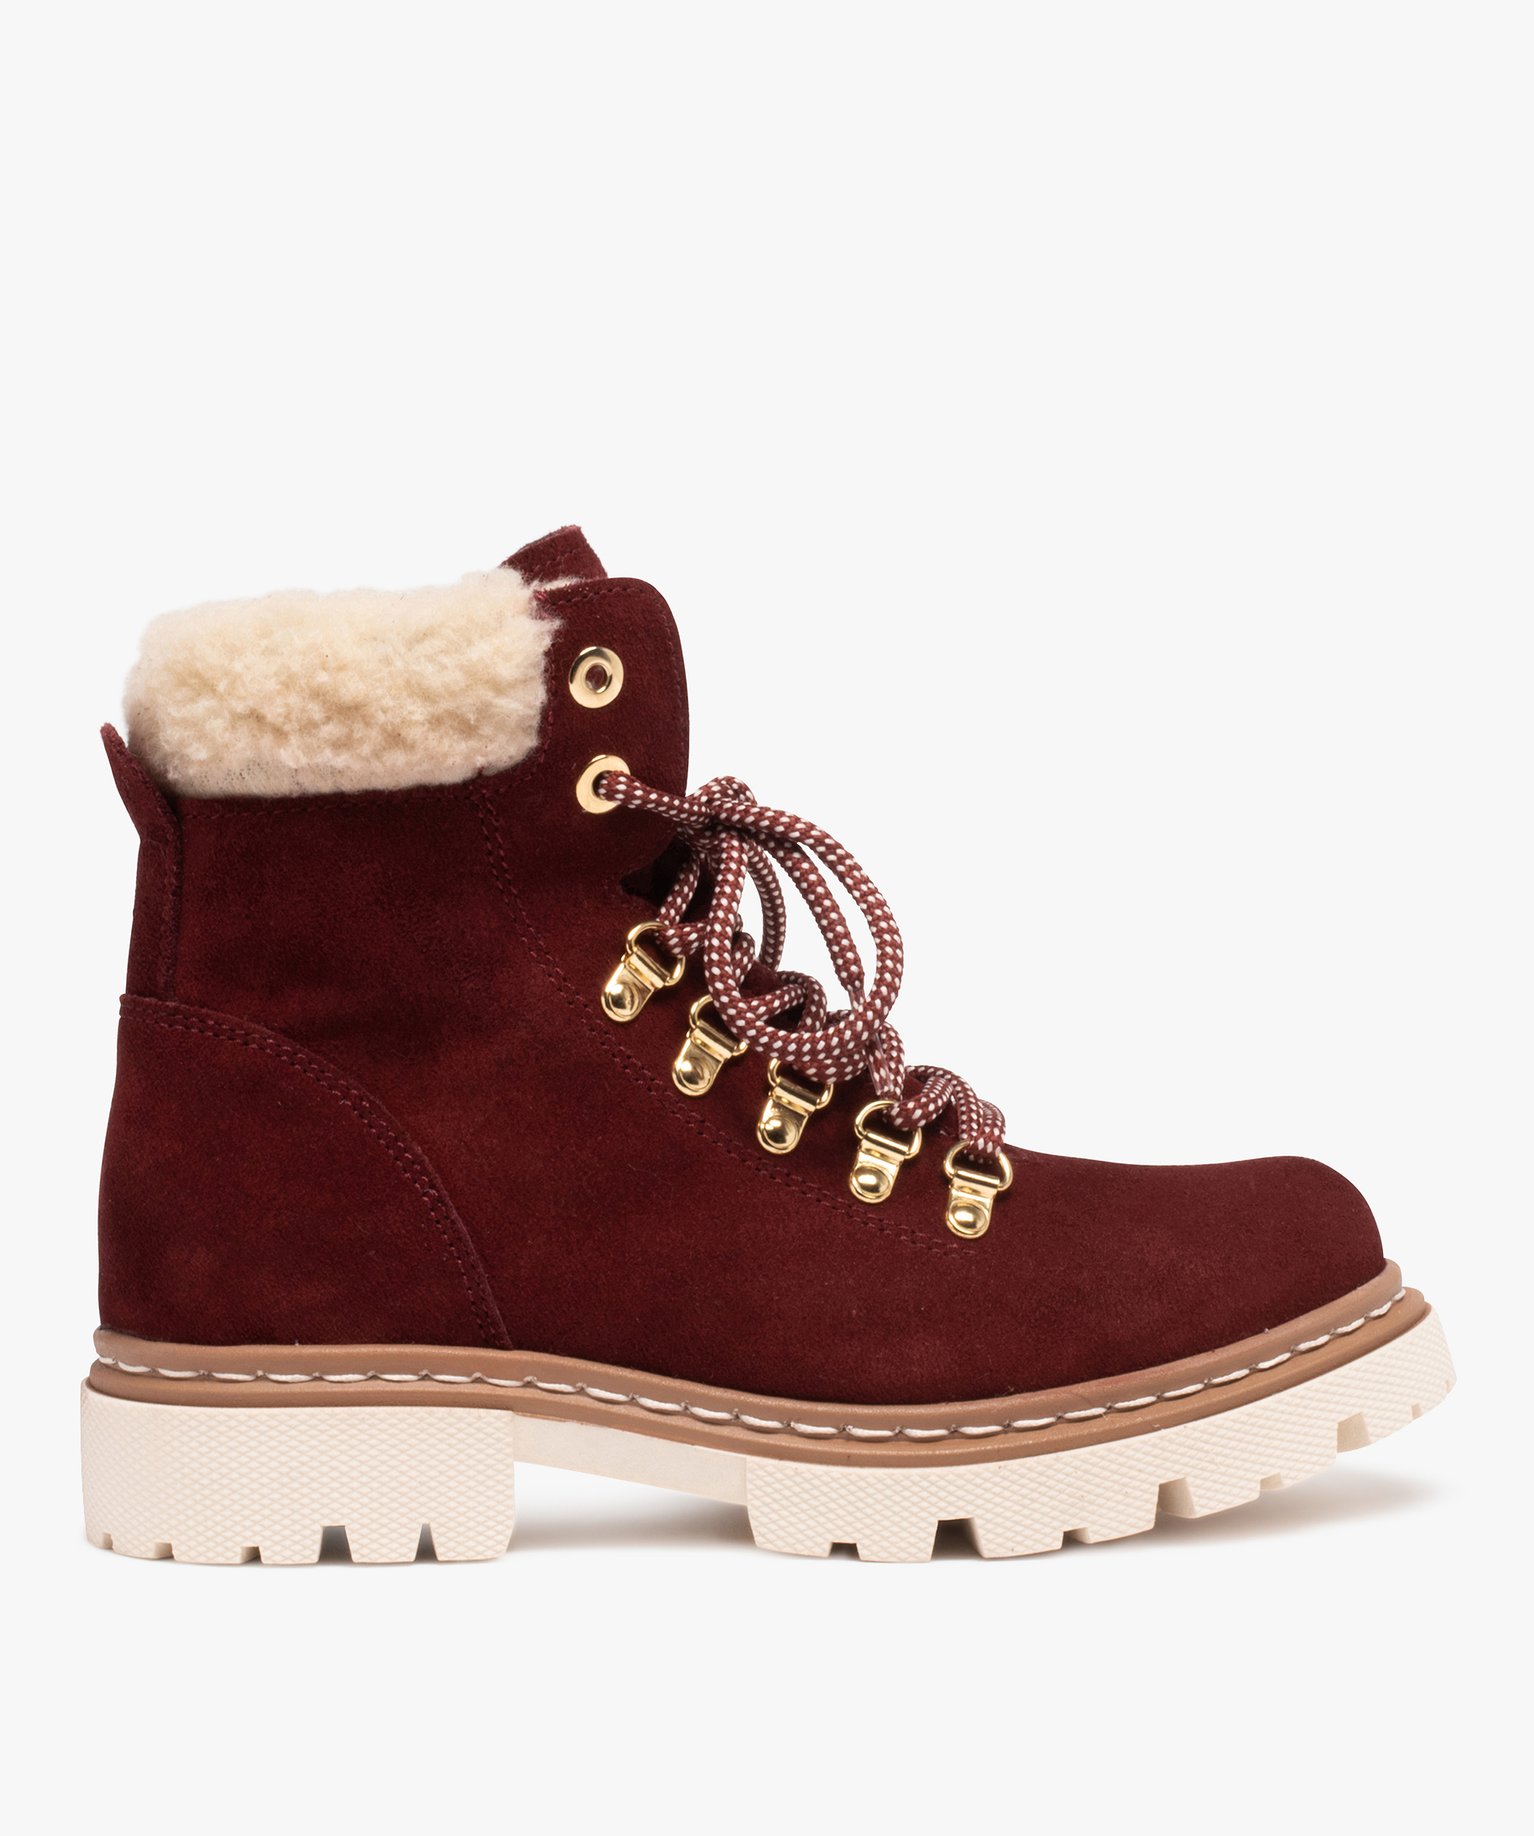 Oven operatie Afsnijden Gemo chaussures boots fourrees femme dessus cuir a col sherpa rouge femme |  GÉMO